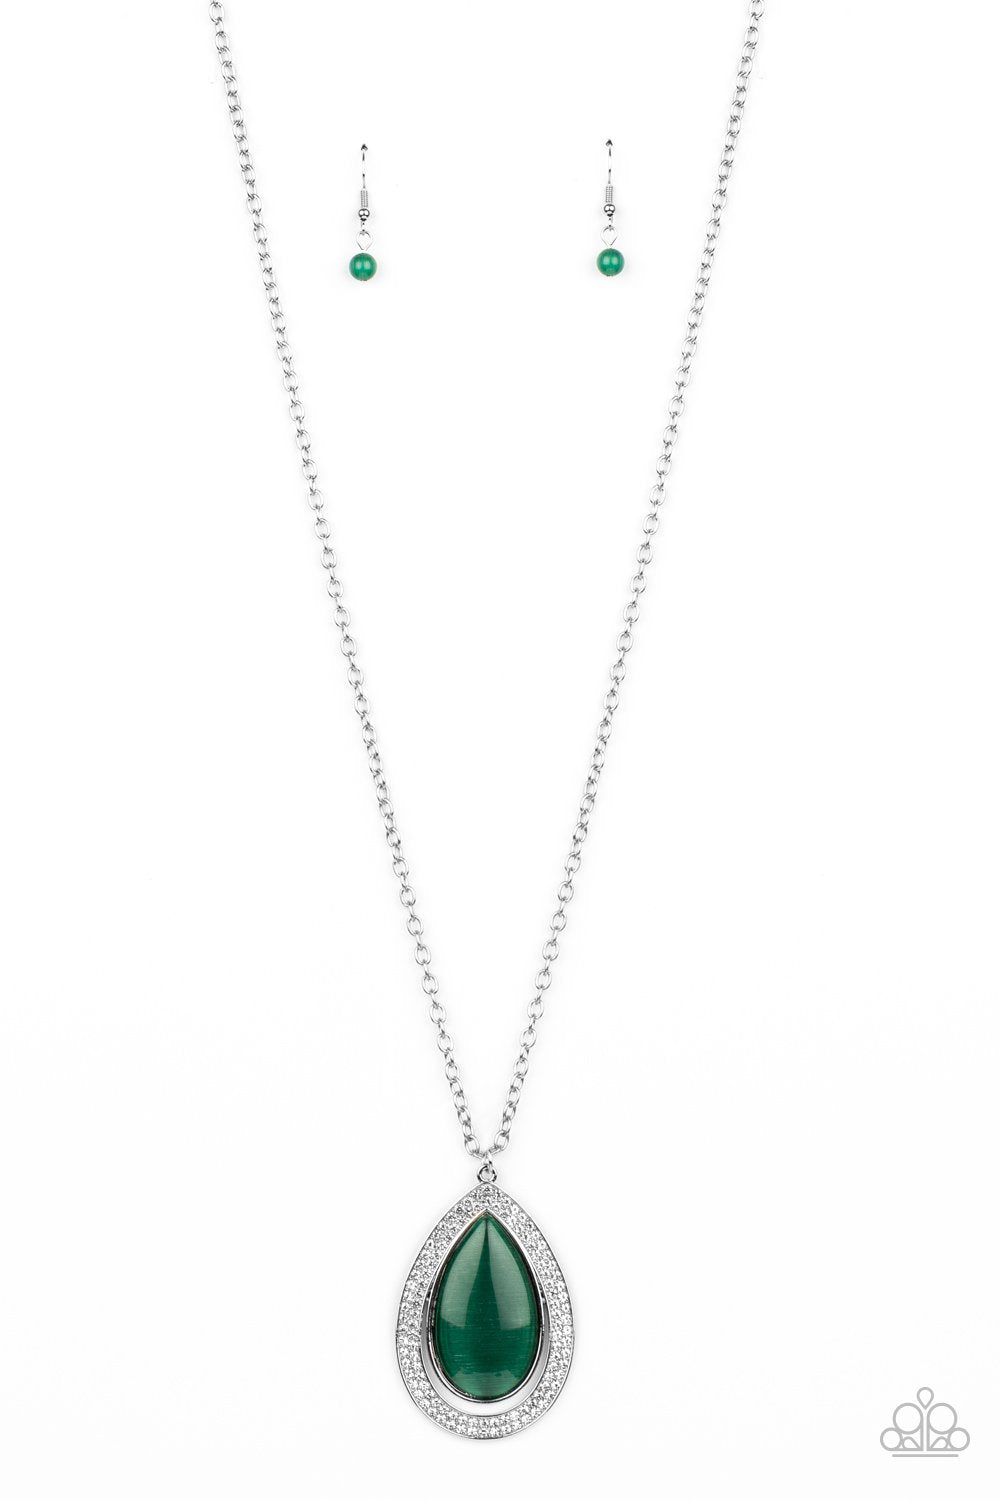 Paparazzi Accessories - Royal Roller - Green Necklace | Alies Bling Bar